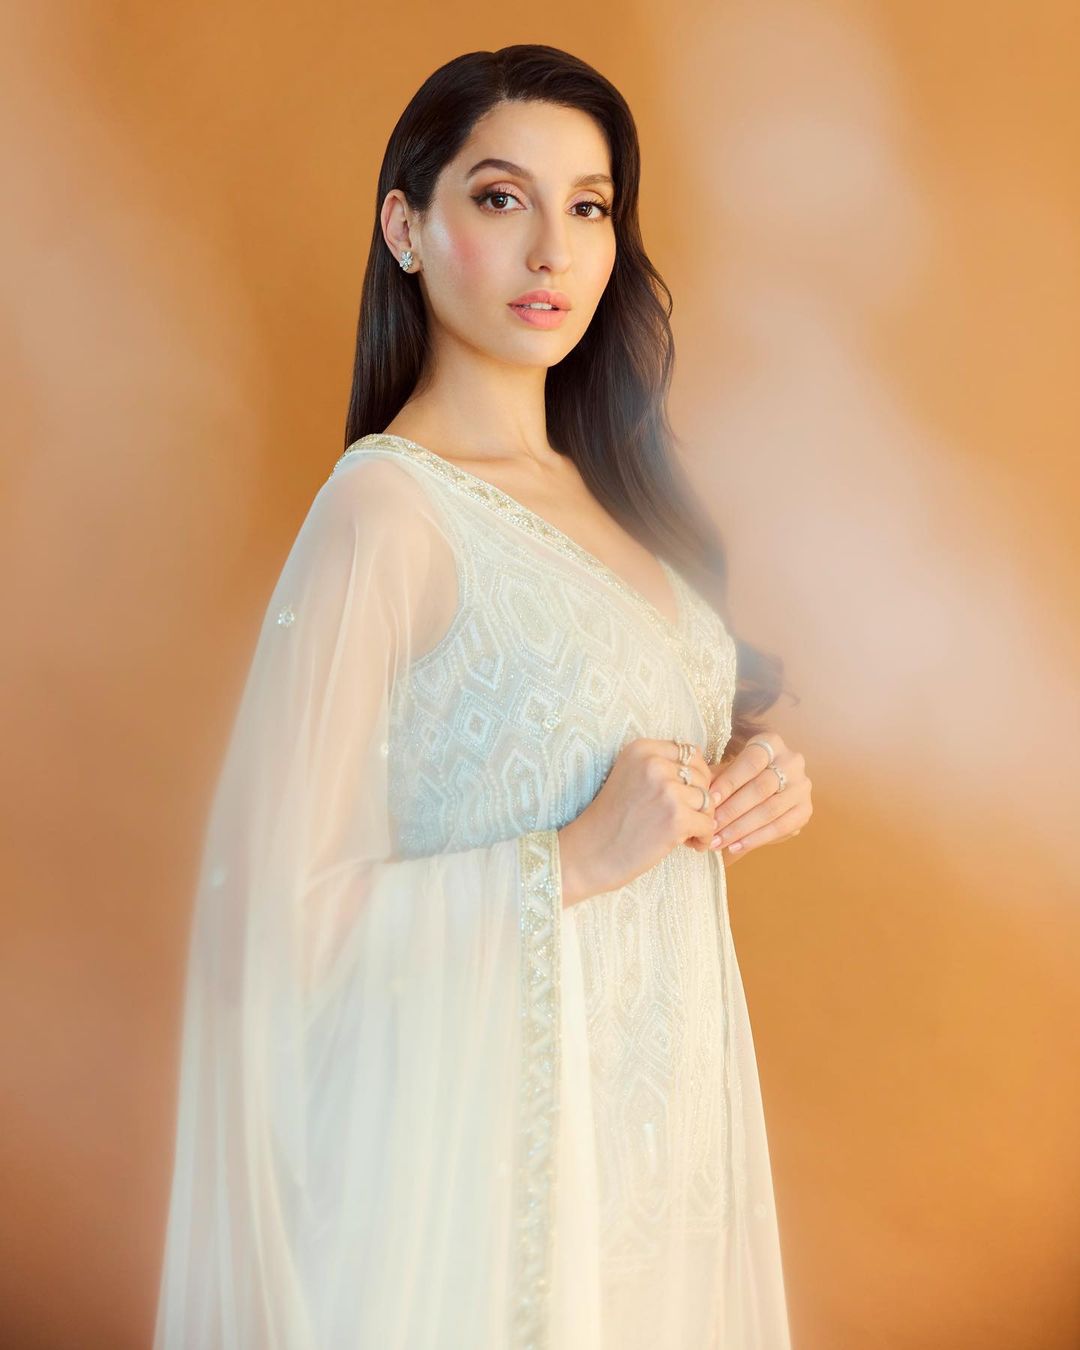 Nora Fatehi is leading the fashion game, see proof 5732